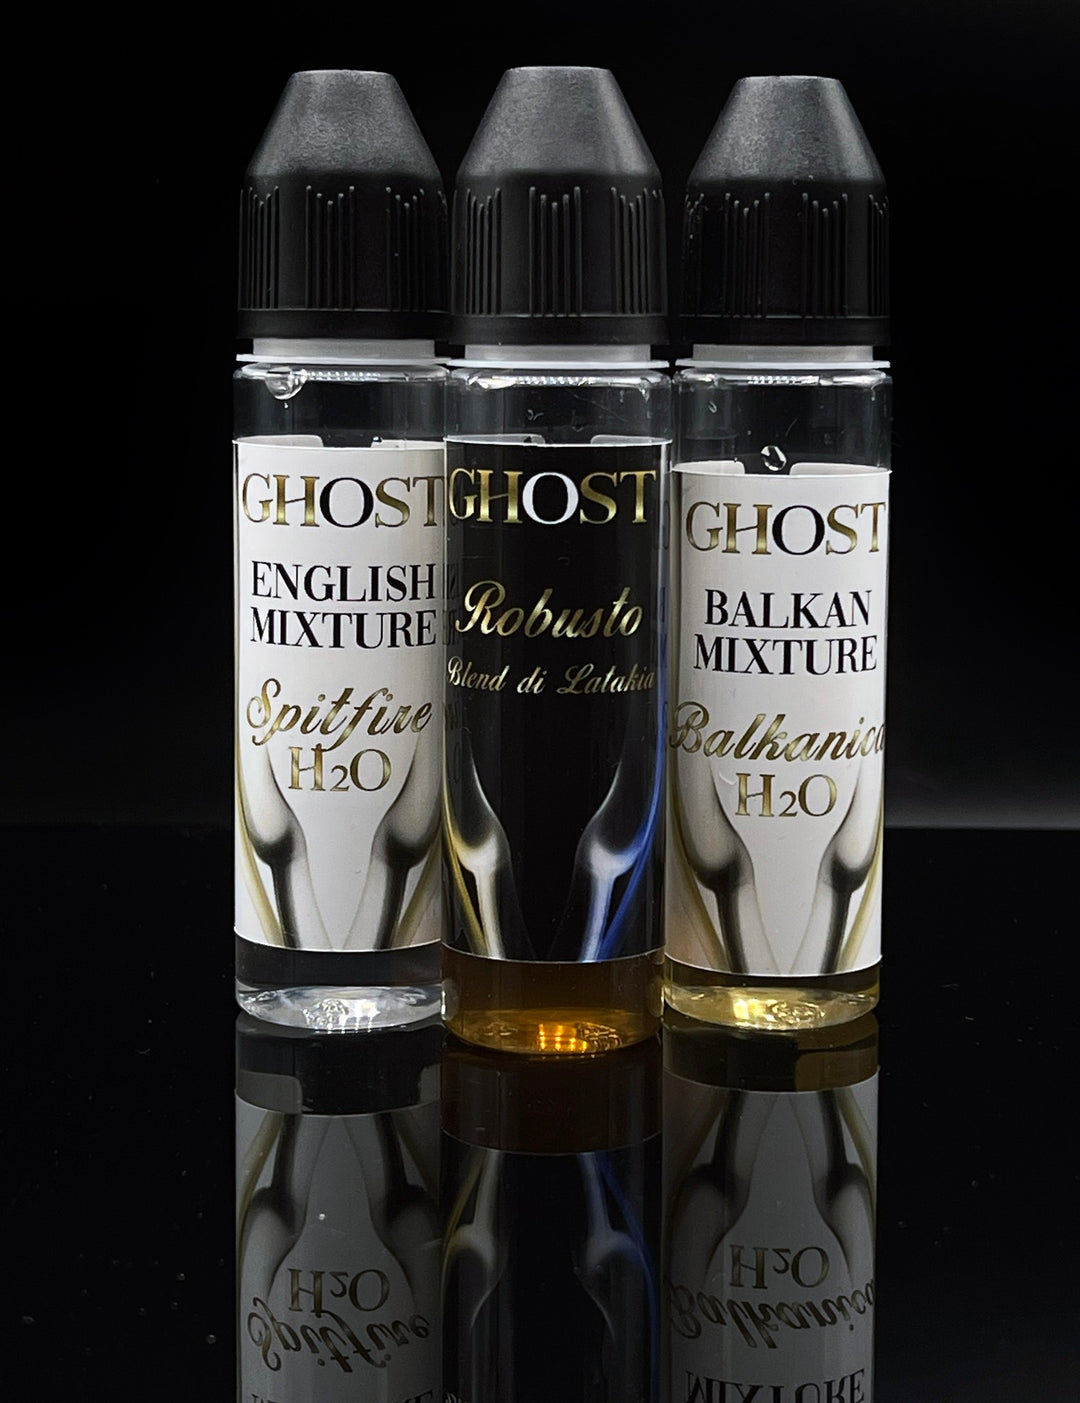 English Mixture - Spitfire - H2O Ghost